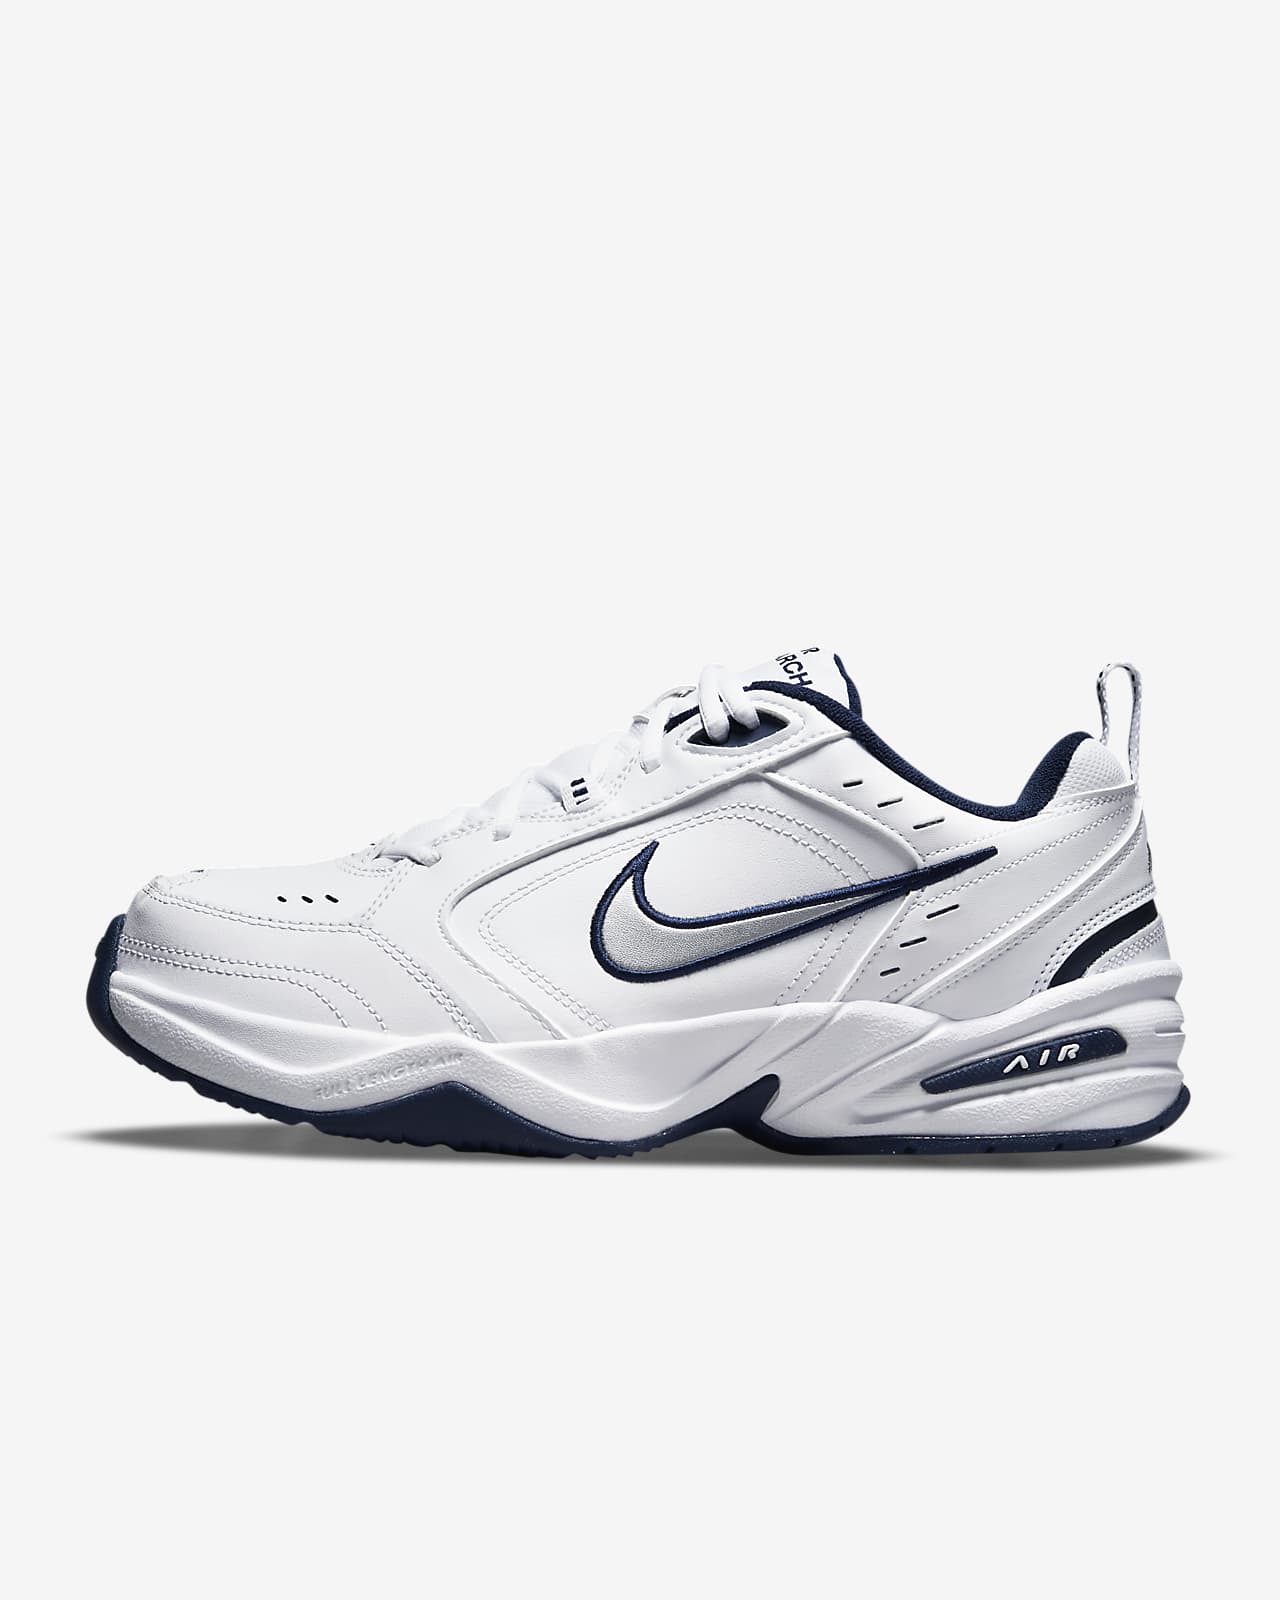 Nike Air Monarch IV (Extra Wide) Lifestyle/Gym Shoe